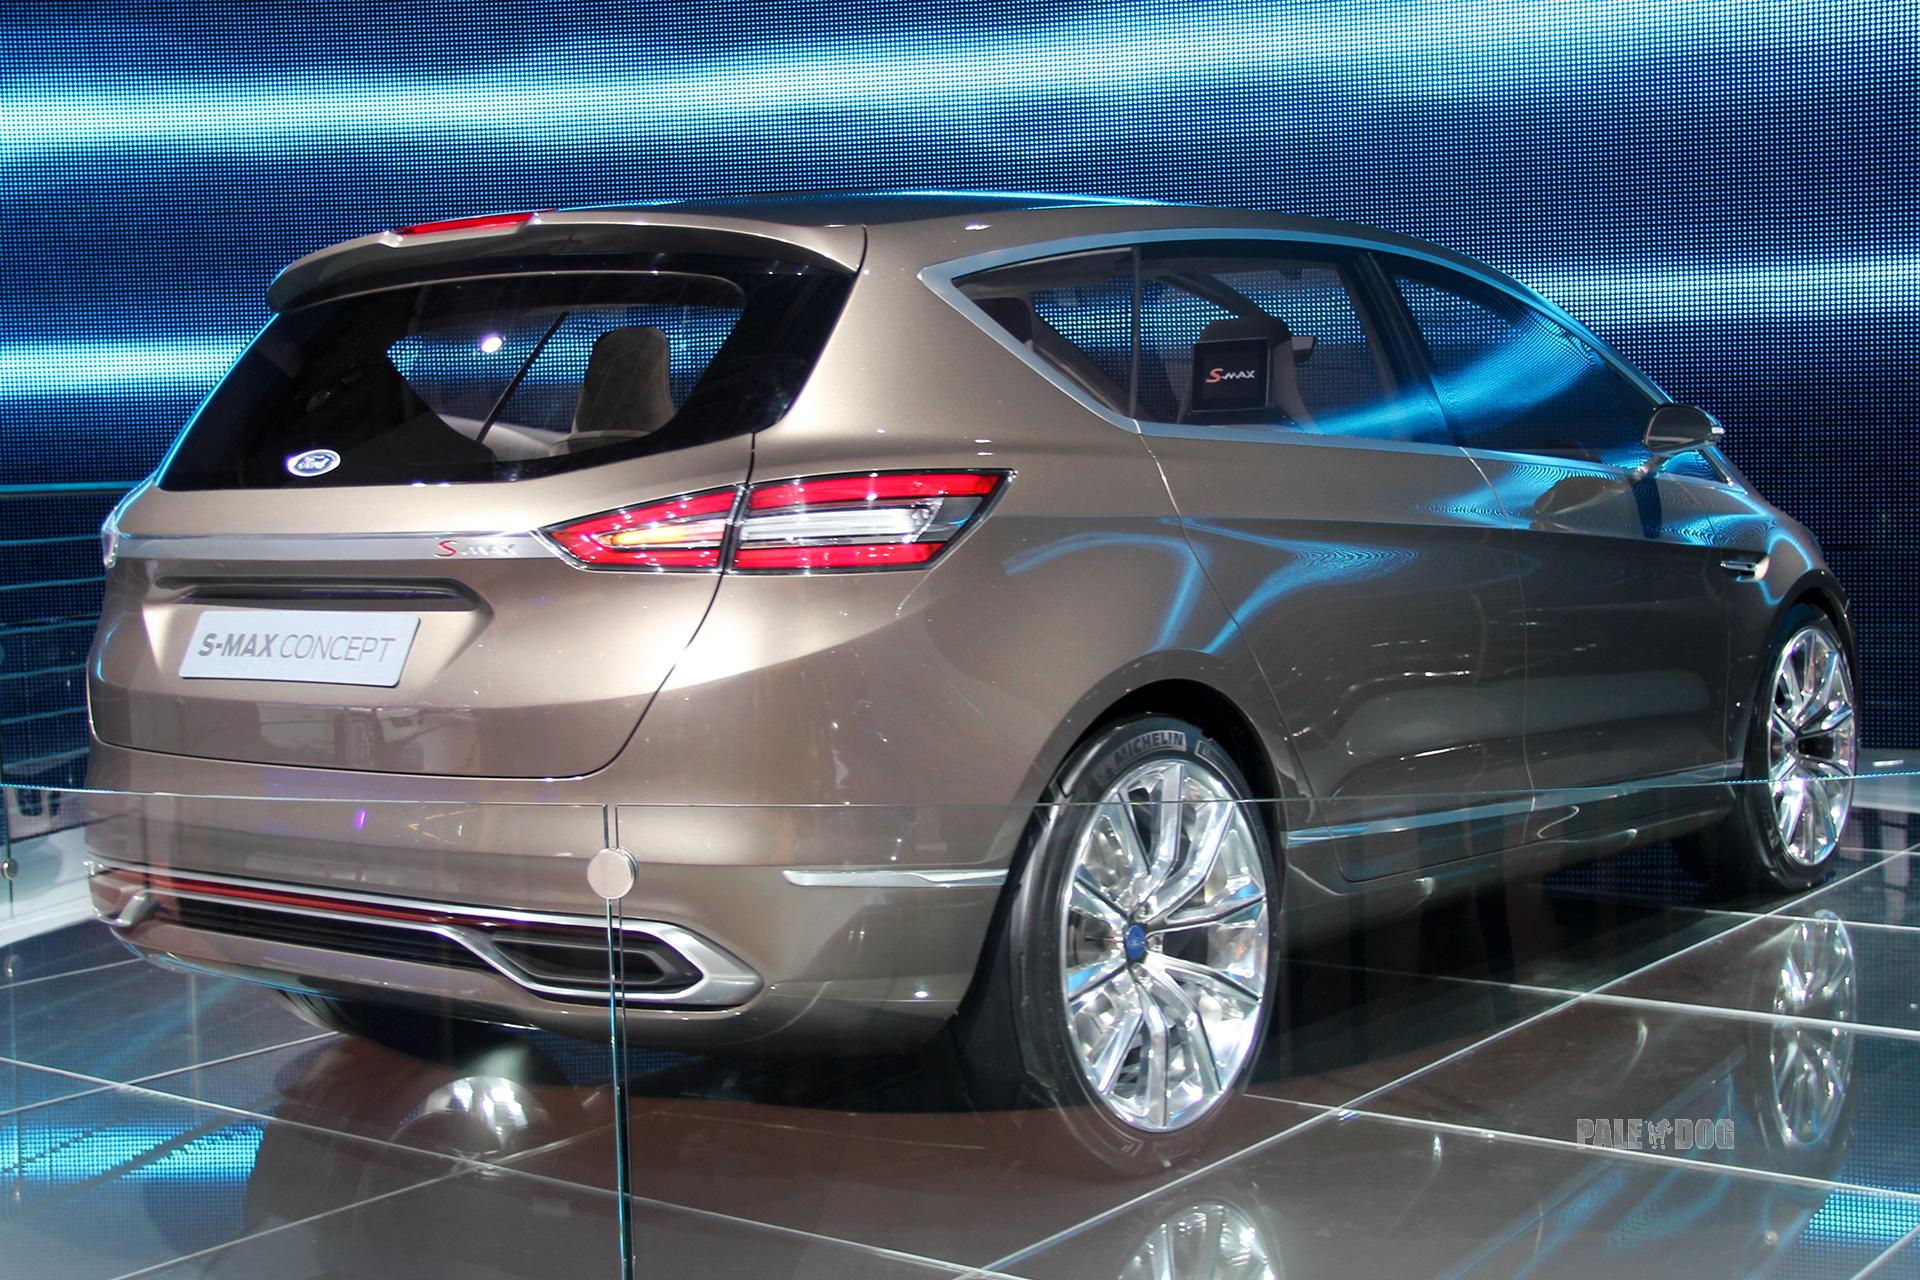 2013 Ford S-Max Concept Wallpapers